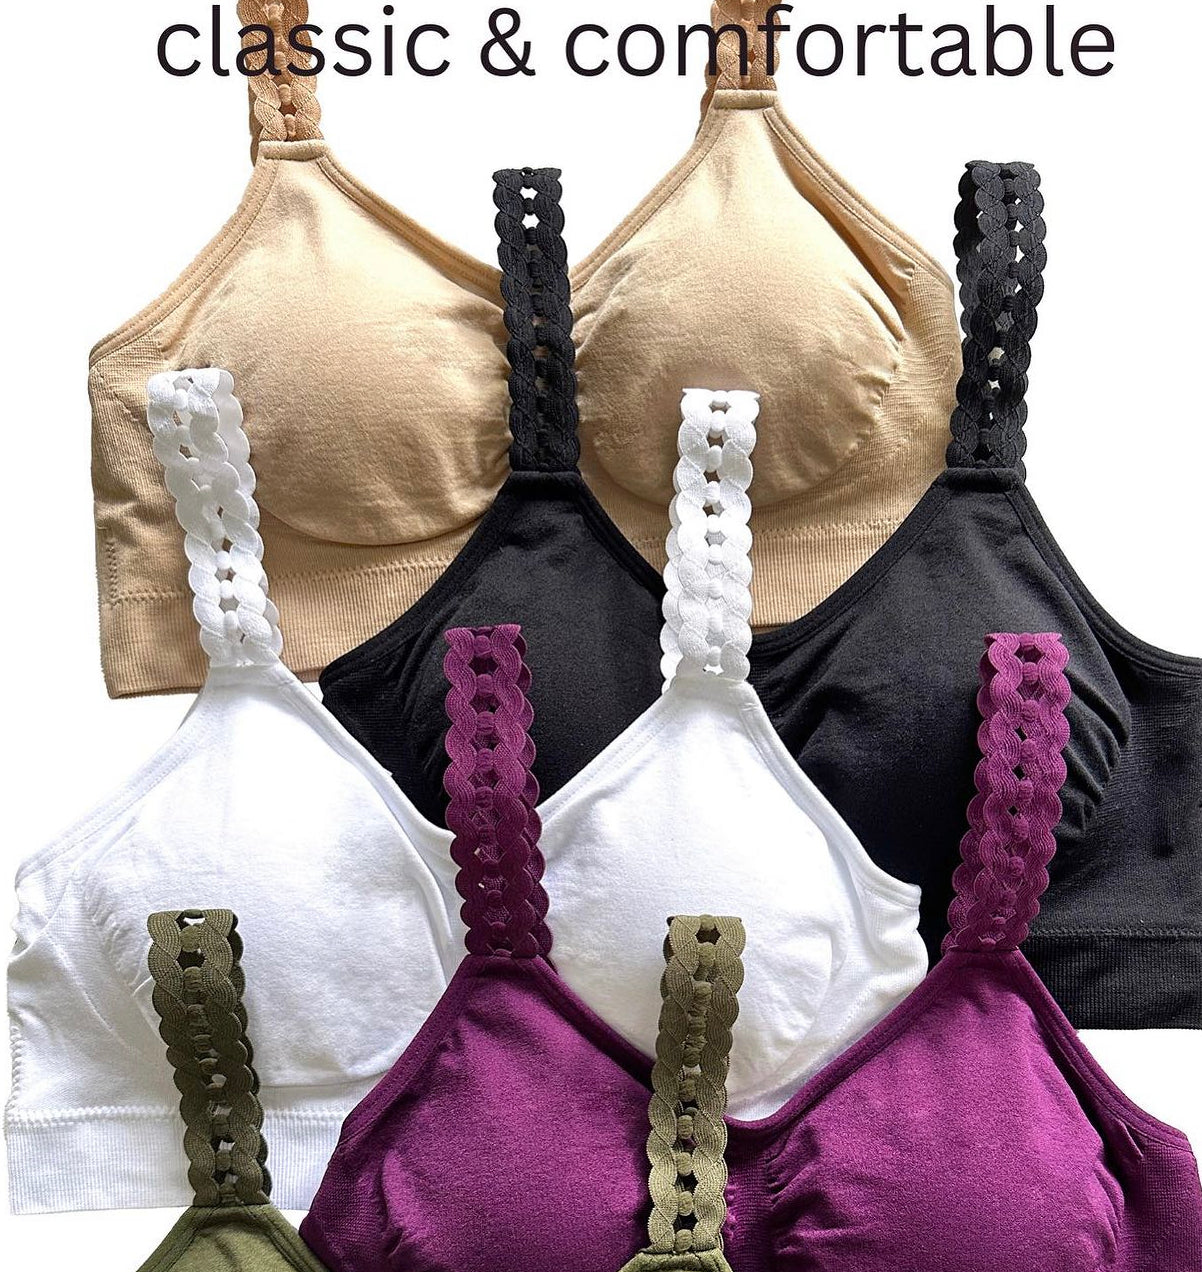 LOTS of options...Strap it bras with attached straps, TOP SELLER (plus size, plunge & interchangeable options are sold separately, click Strap Its tab on website for more options)